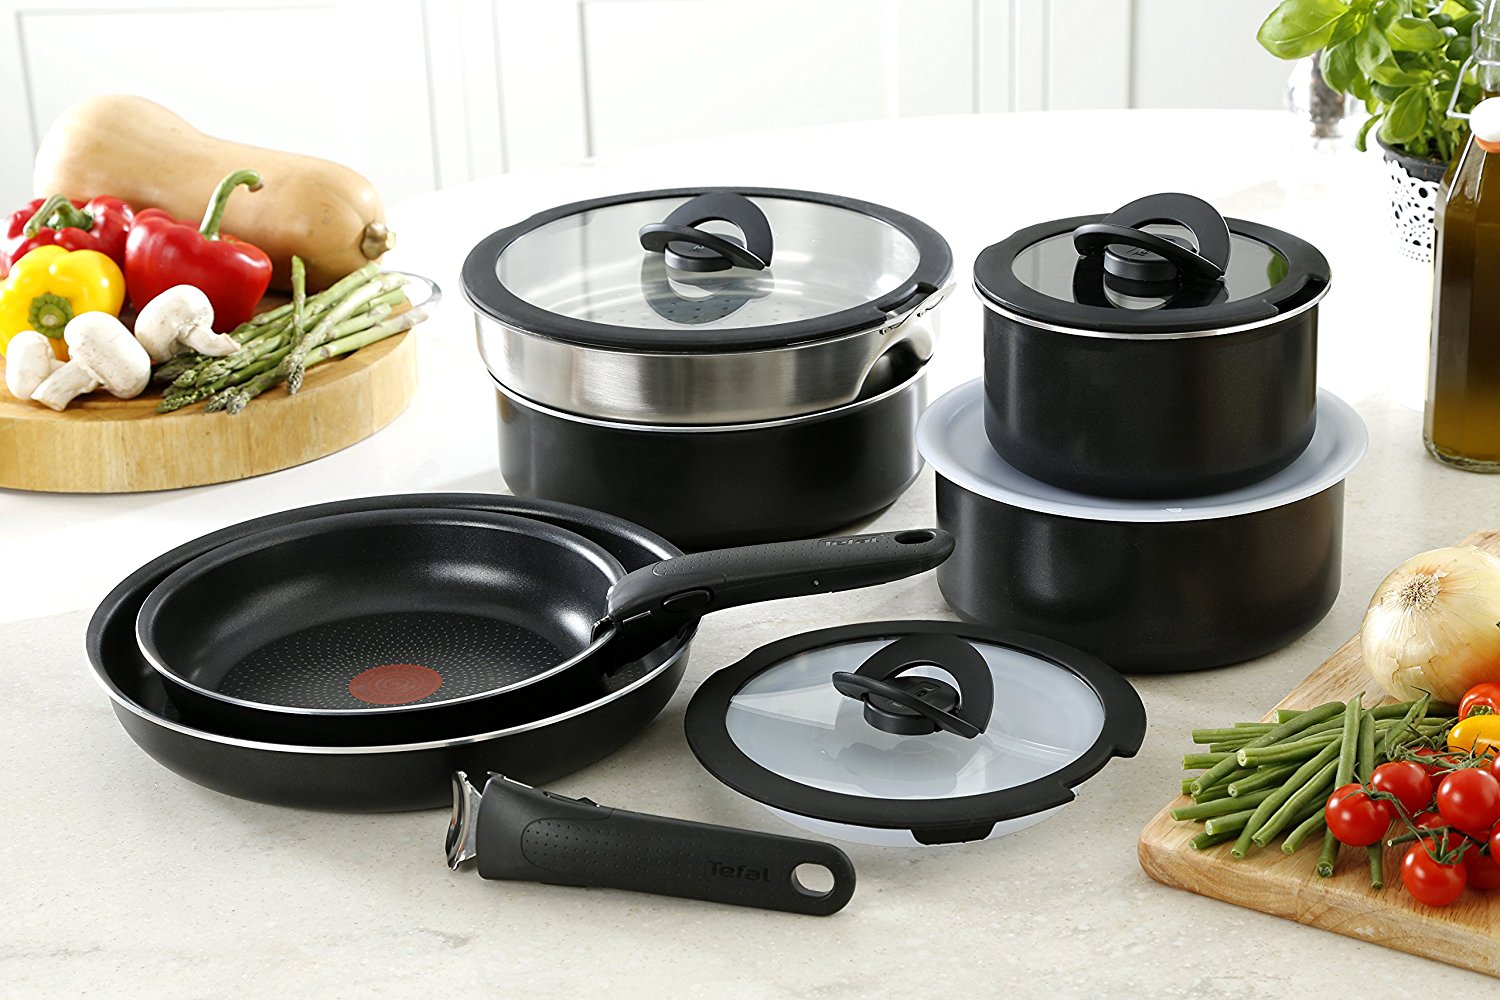 Tefal, Ulster Stores